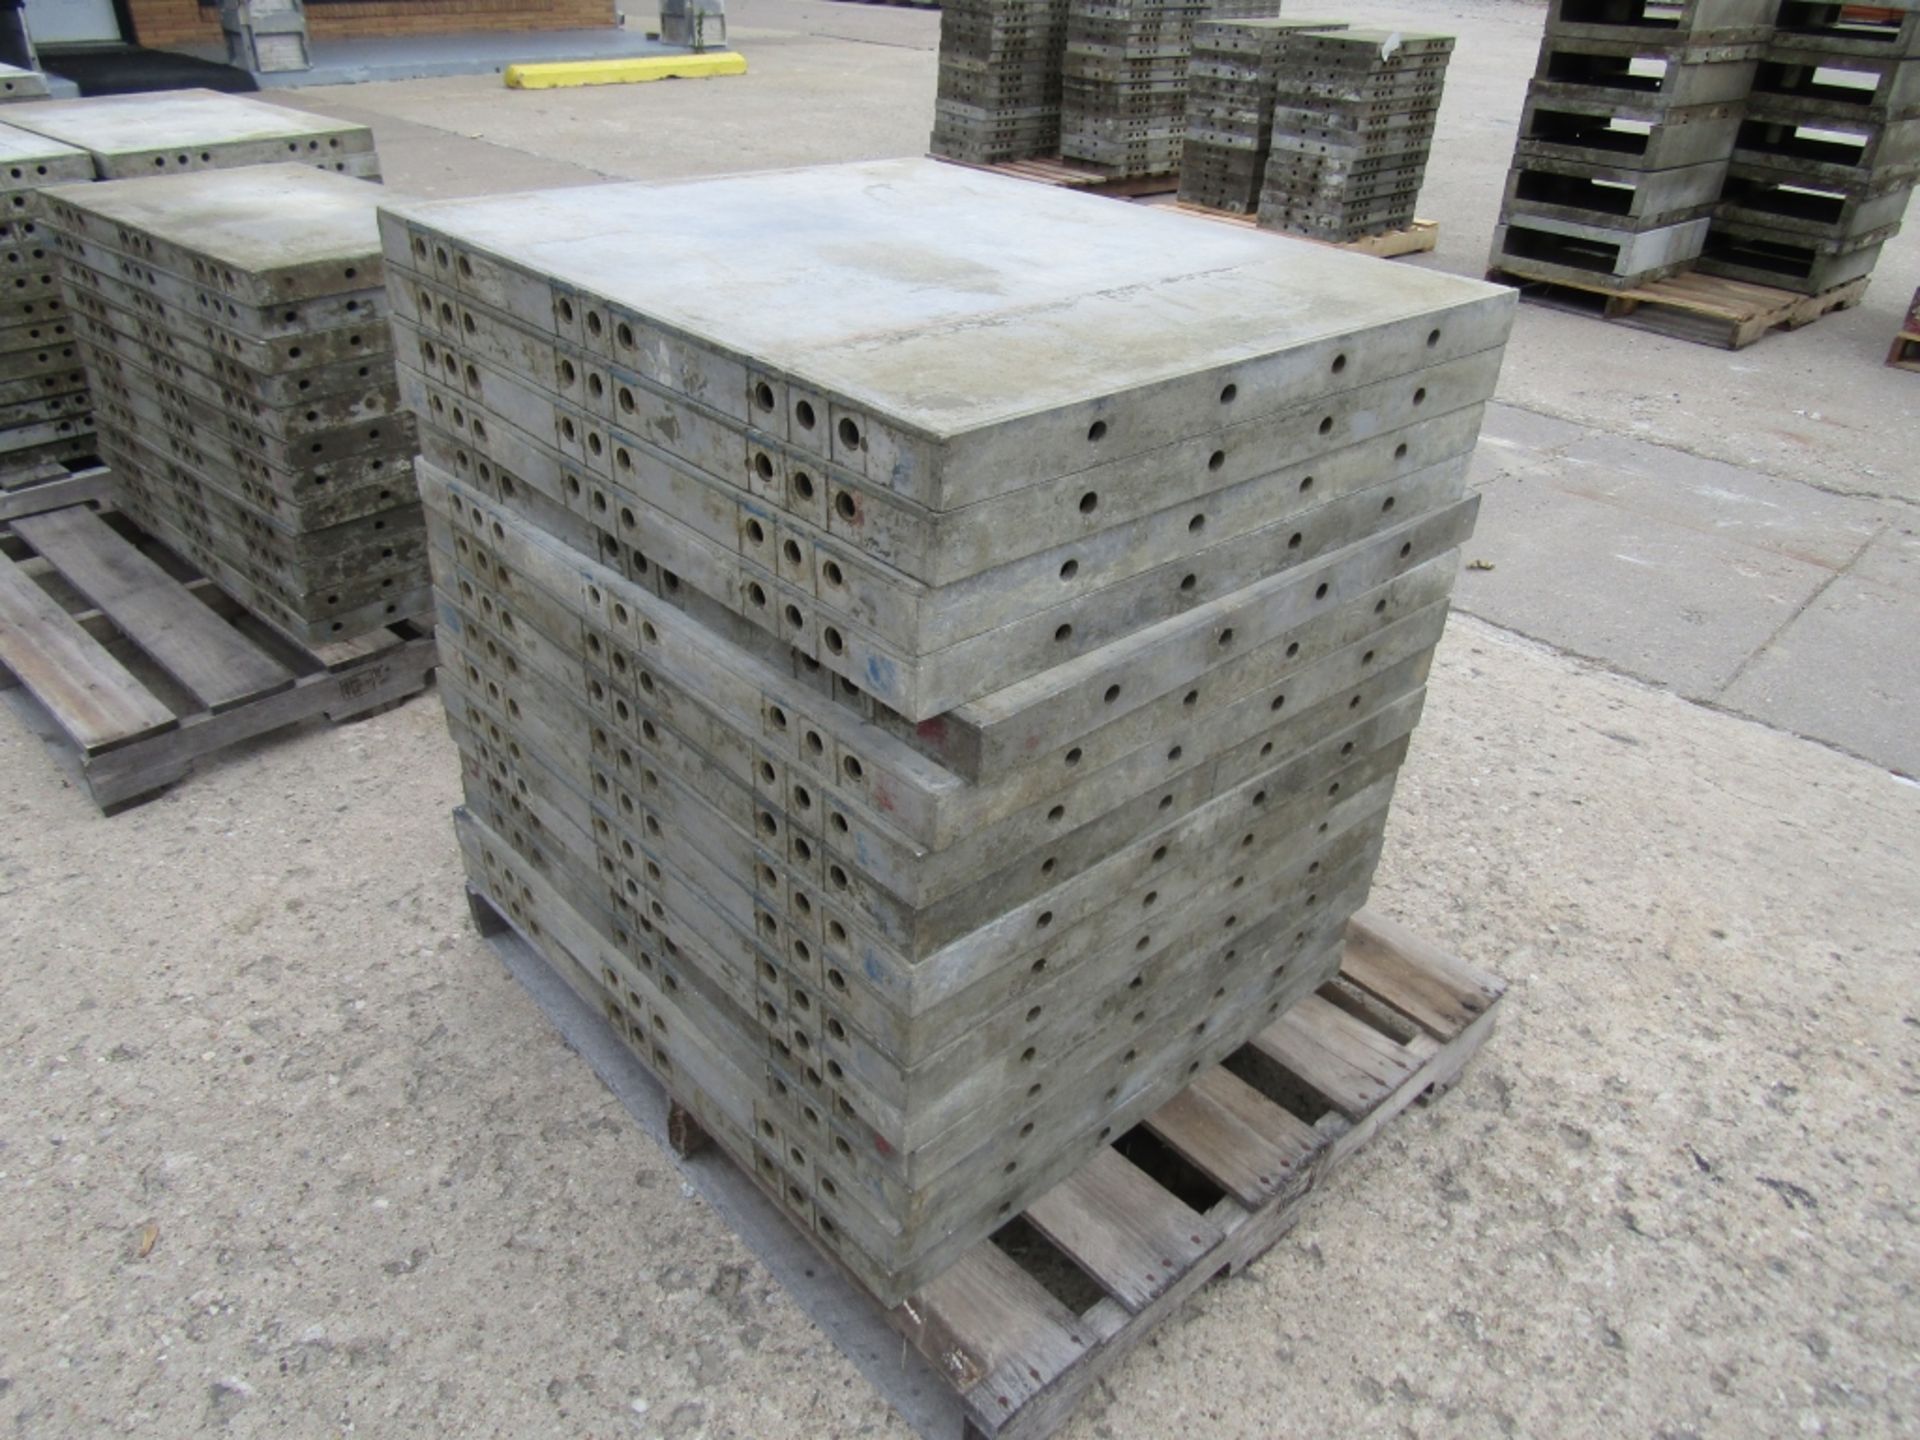 (16) 30" x 3' Western elite Concrete Forms, Smooth 6-12 Hole Pattern Triple Punch/ Gasket, Located - Image 2 of 4